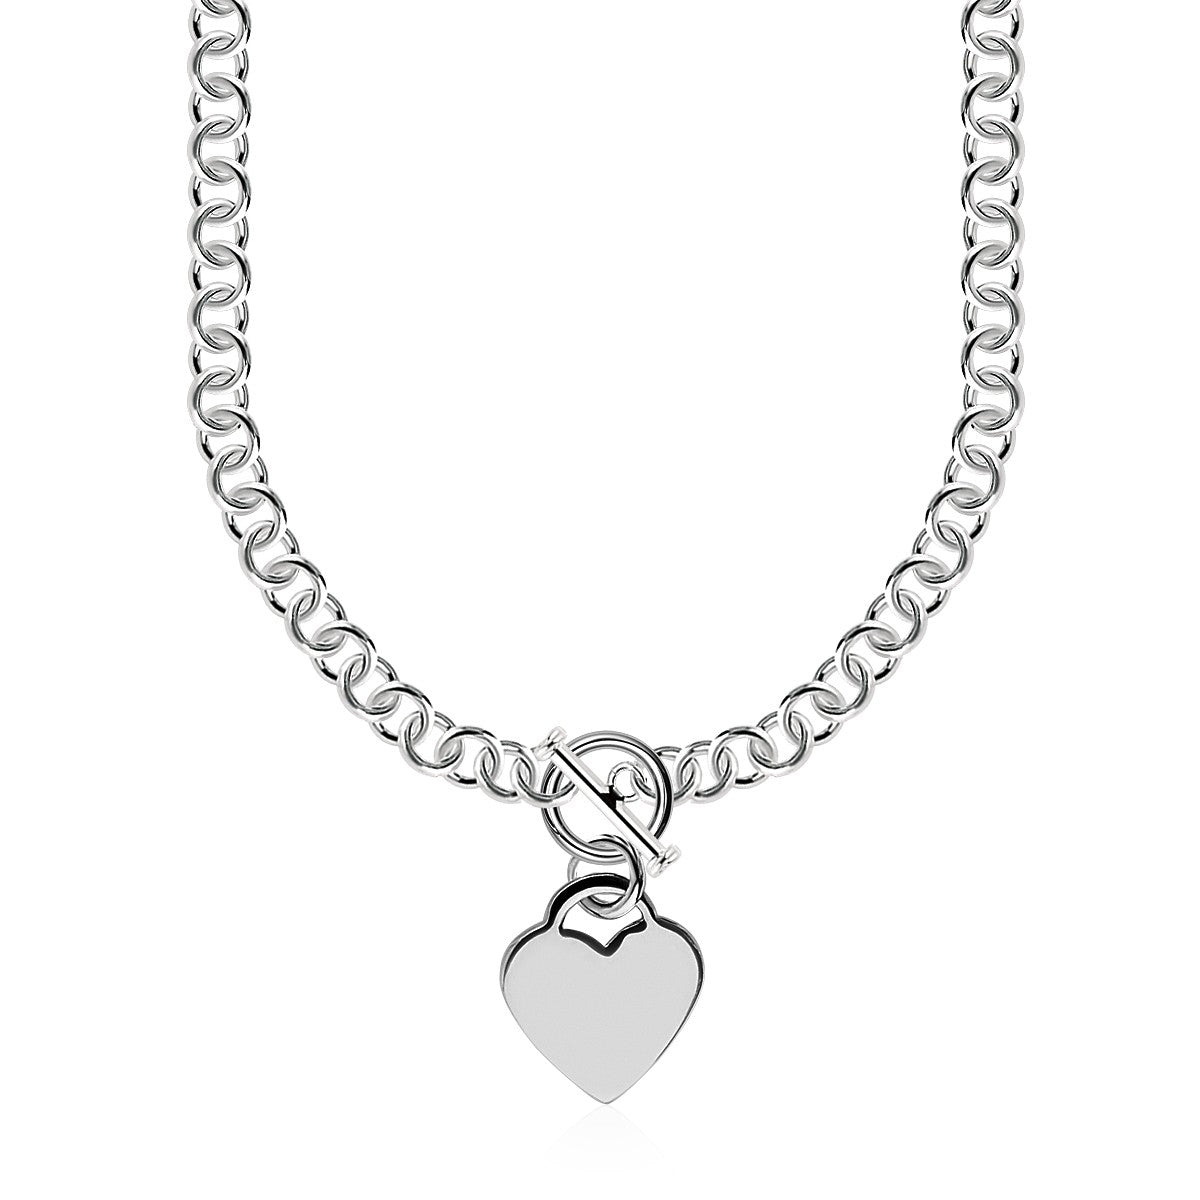 Sterling Silver Rolo Chain  with a Heart Toggle Charm and Rhodium Plating